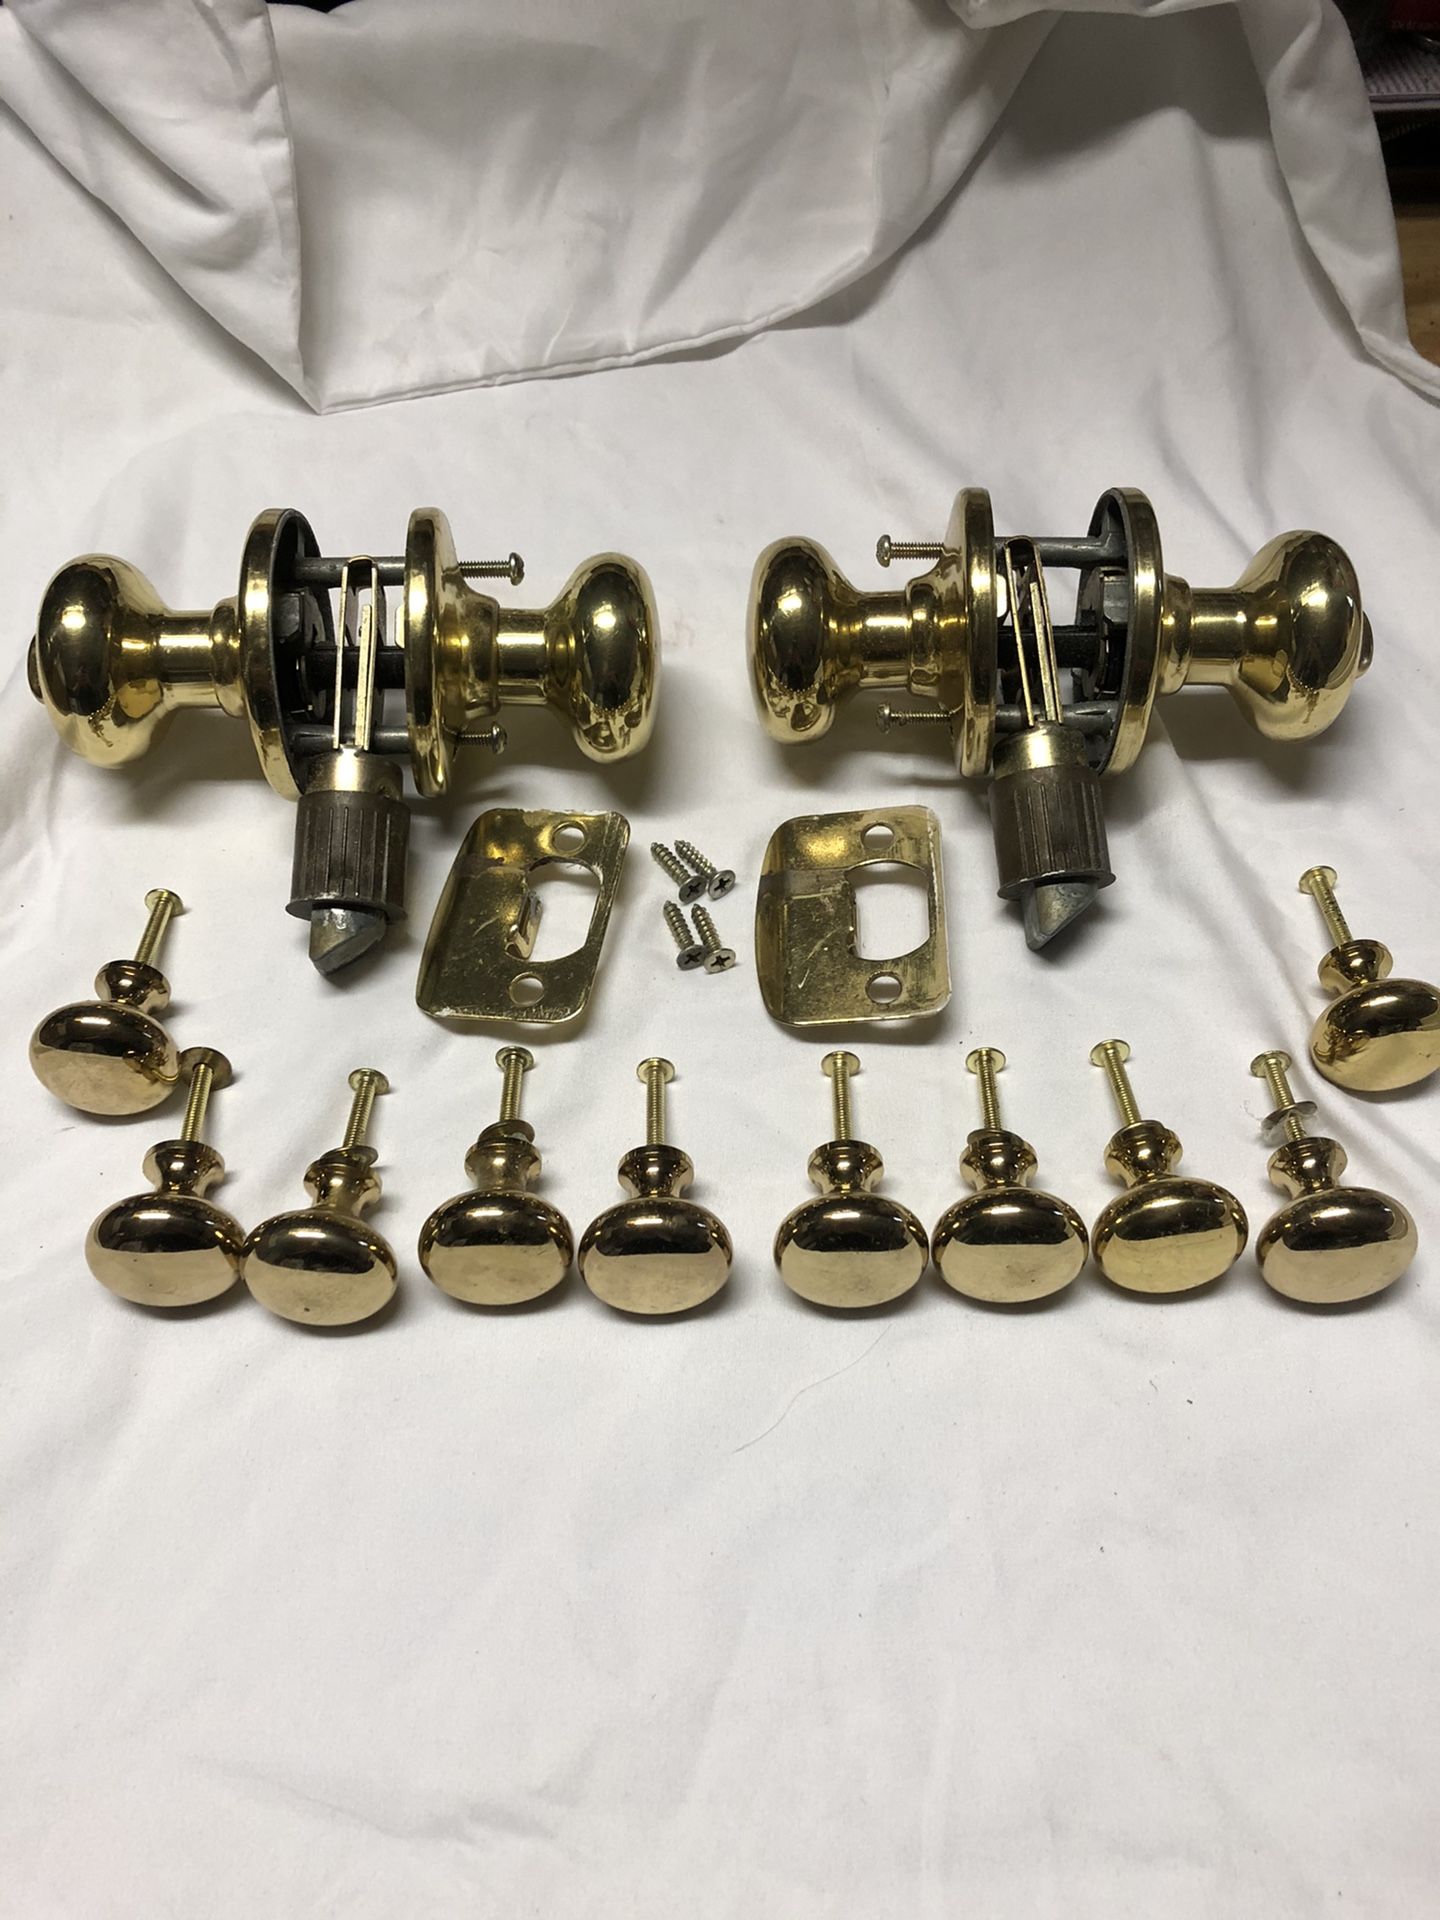 Brass locking door knobs & Brass Handle knobs for dressers or cabinets